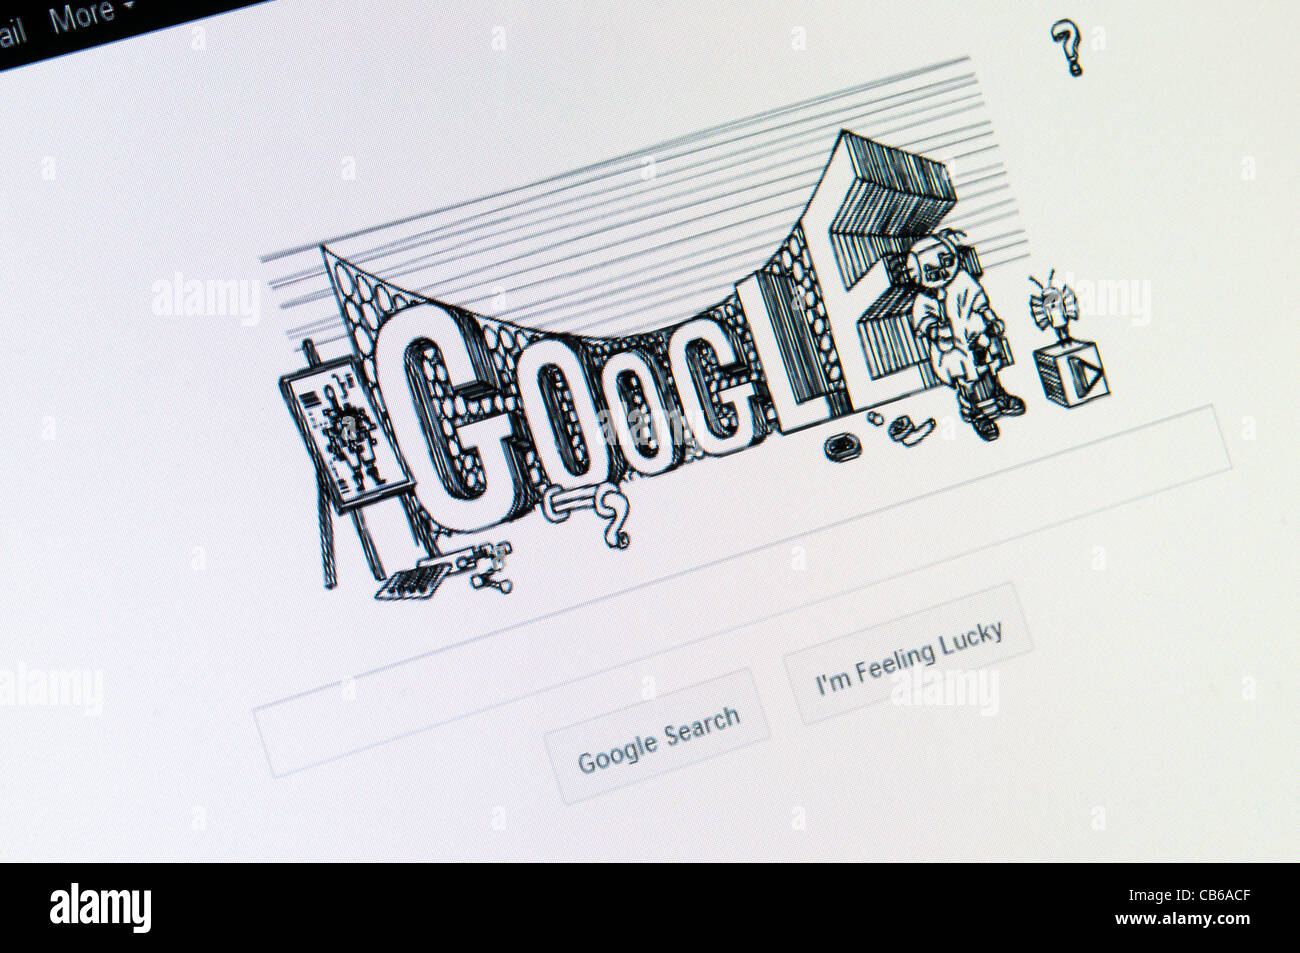 The Google search engine web site front page celebrating 60th anniversary of the publication of the first book by Stanislaw Lem. Stock Photo